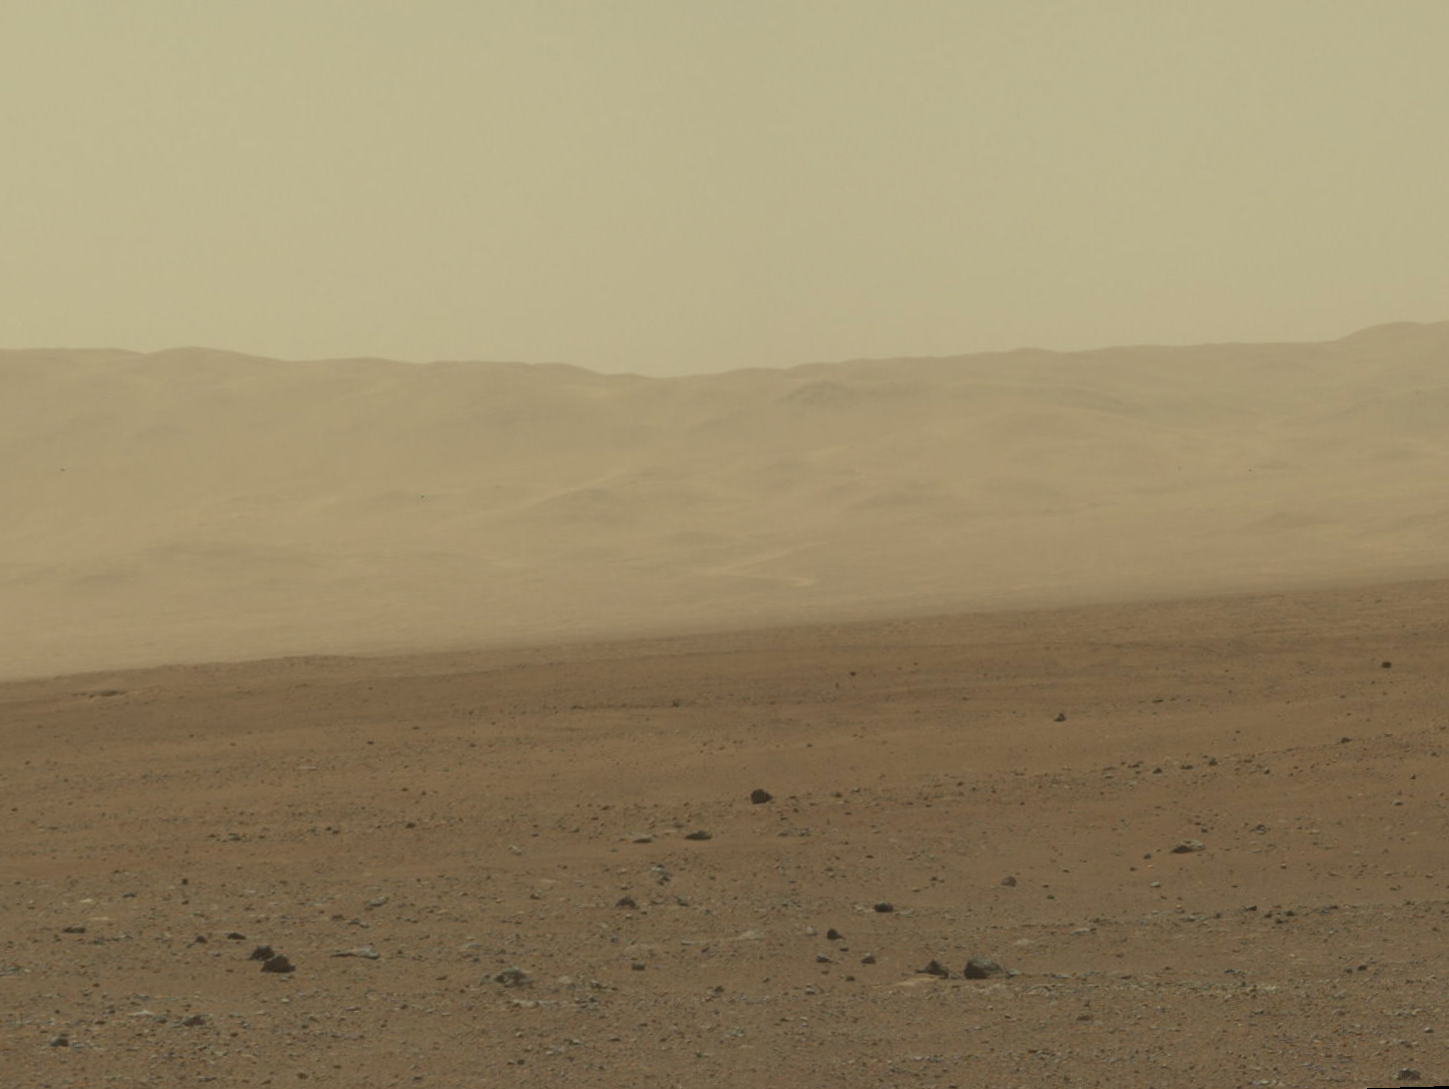 Landscape of Mars from Curiosity